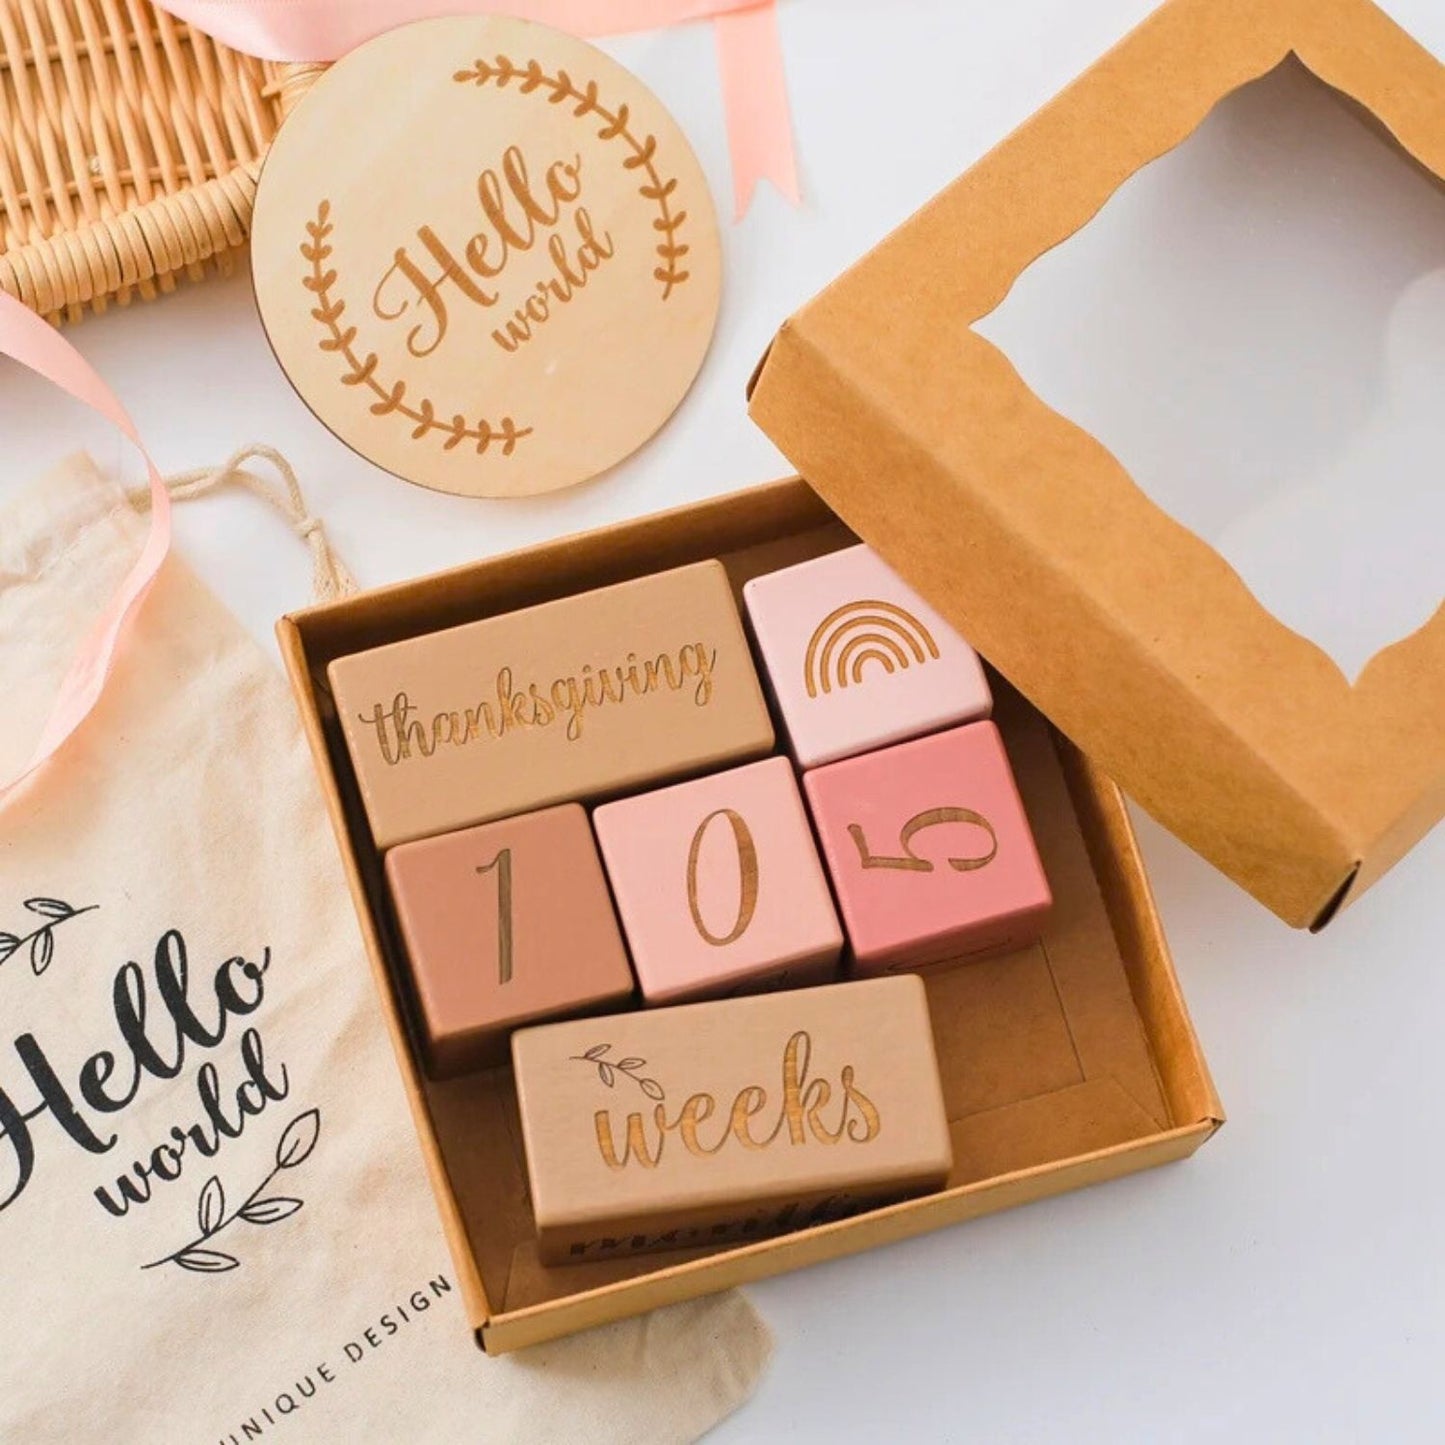 Wooden baby milestone blocks pink and natural wood color in an opened gift box